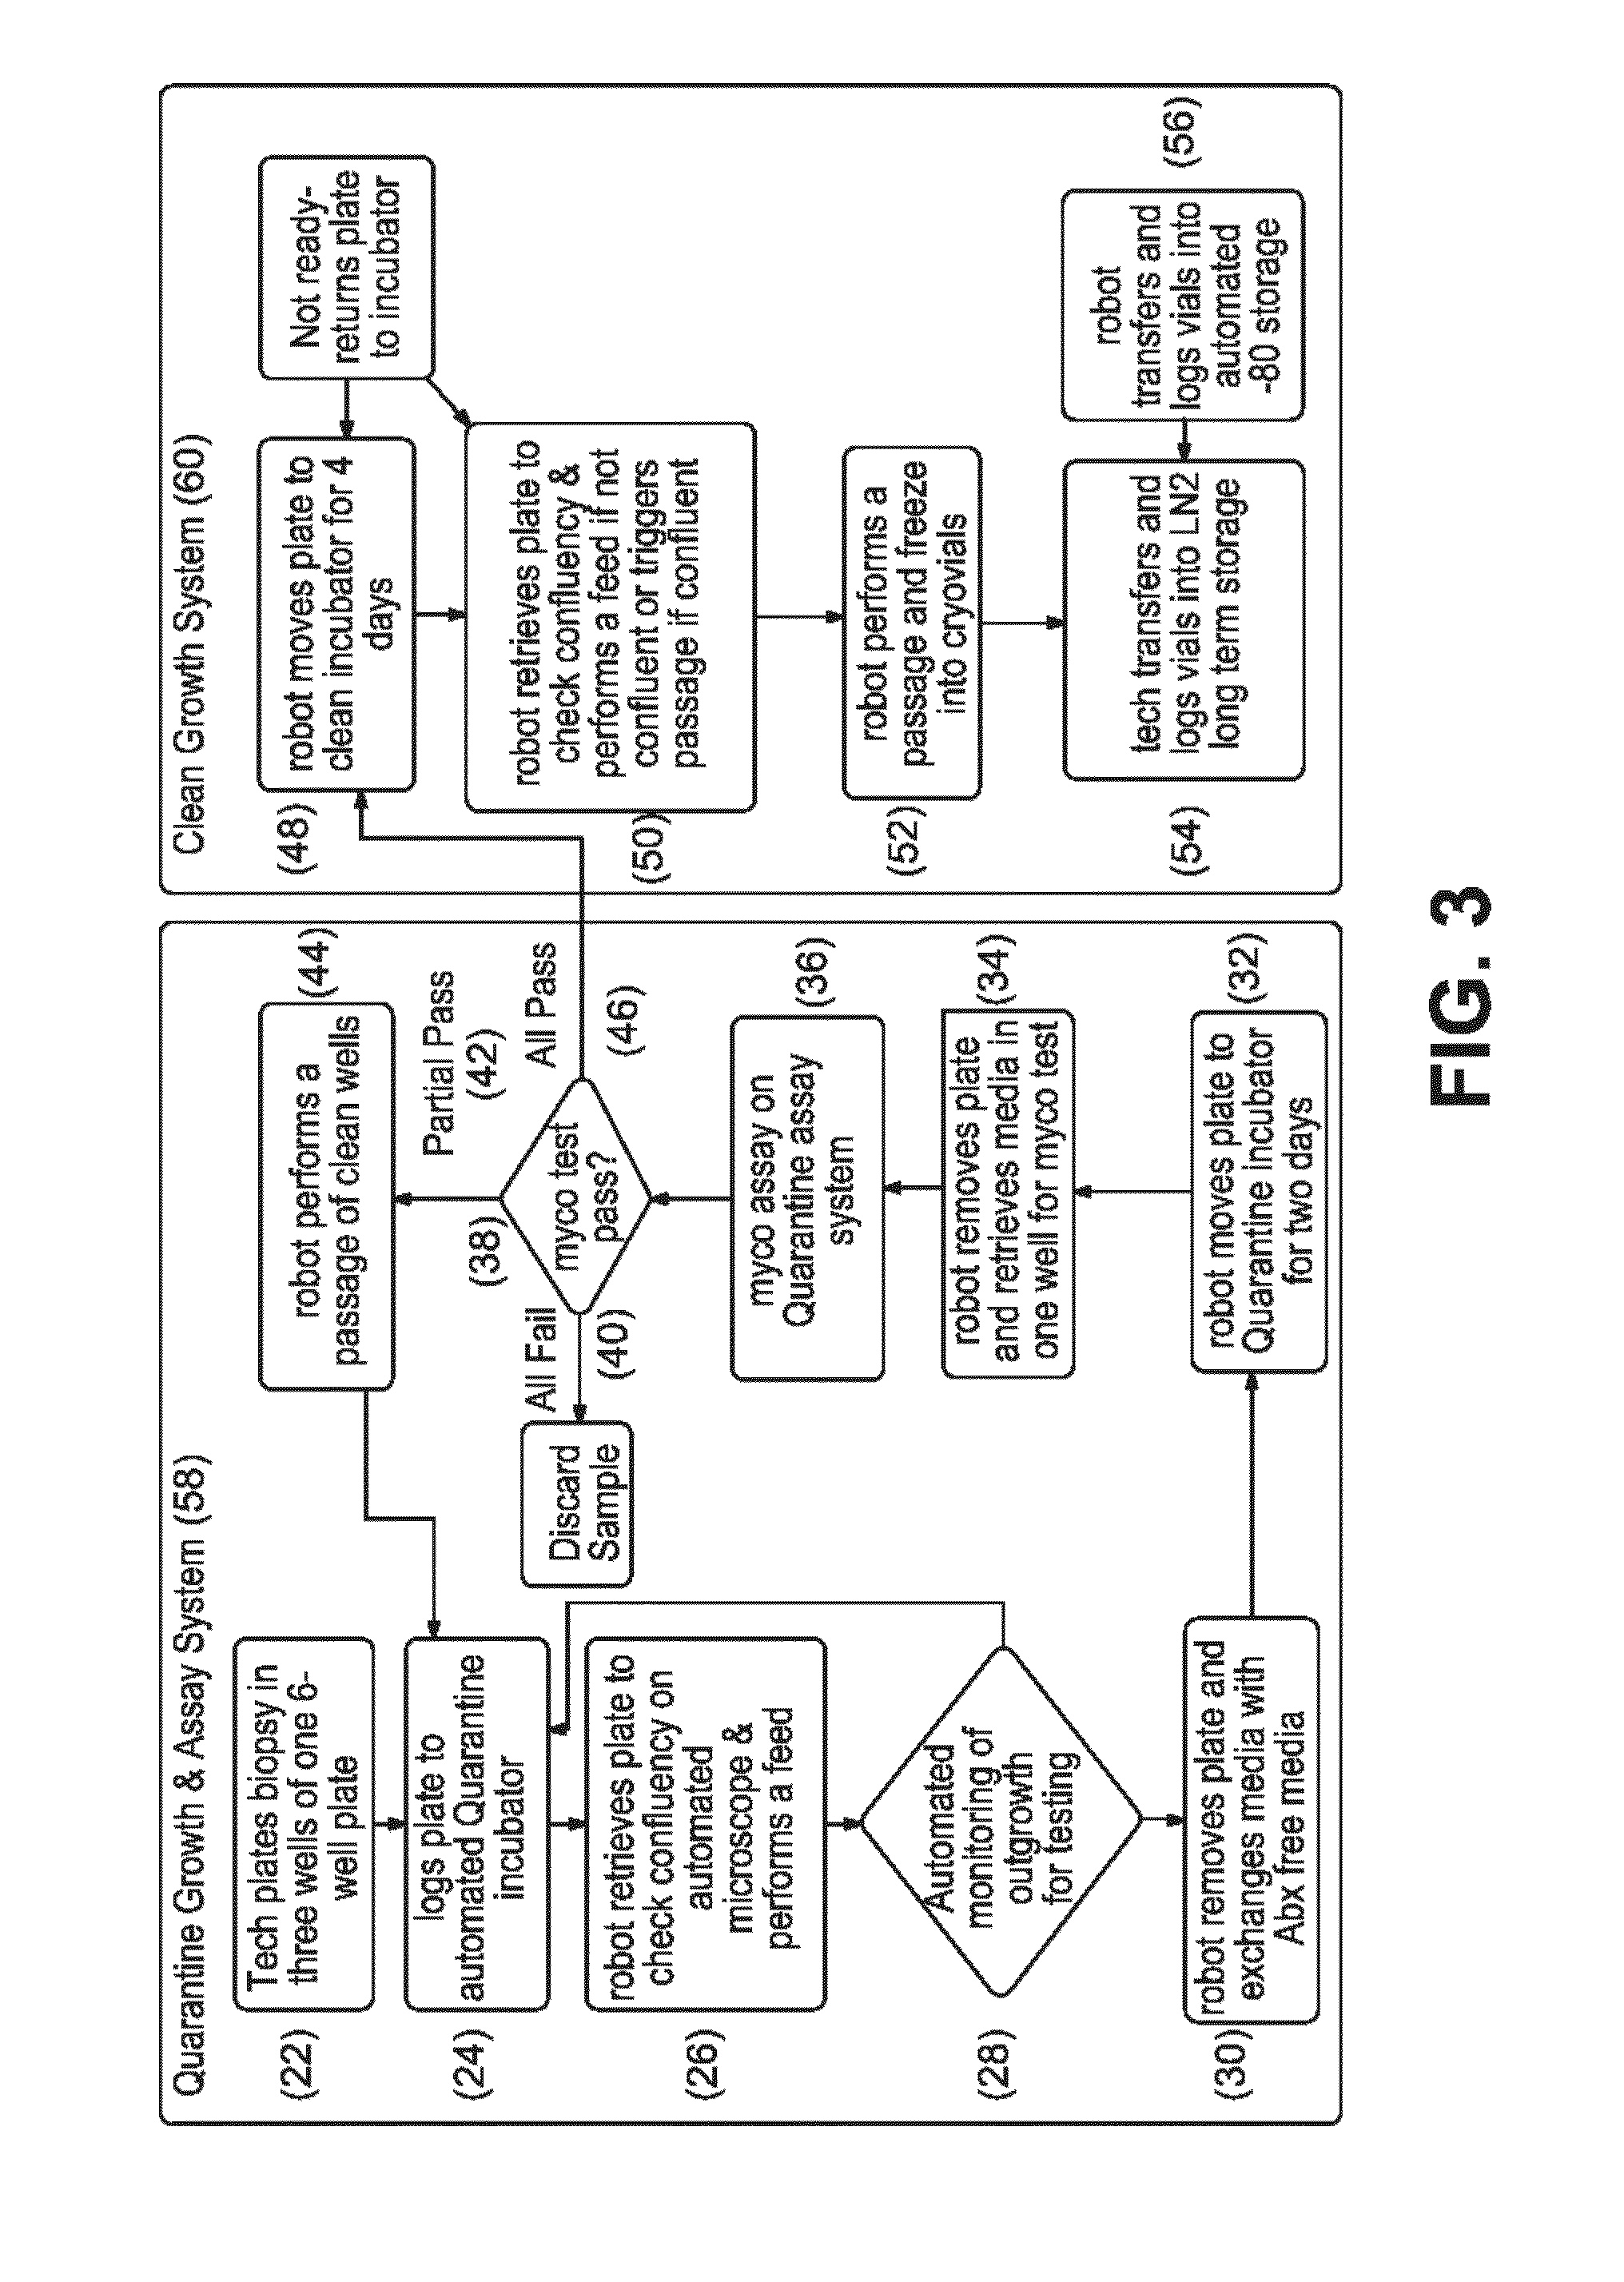 Systems and methods for producing stem cells and differentiated cells